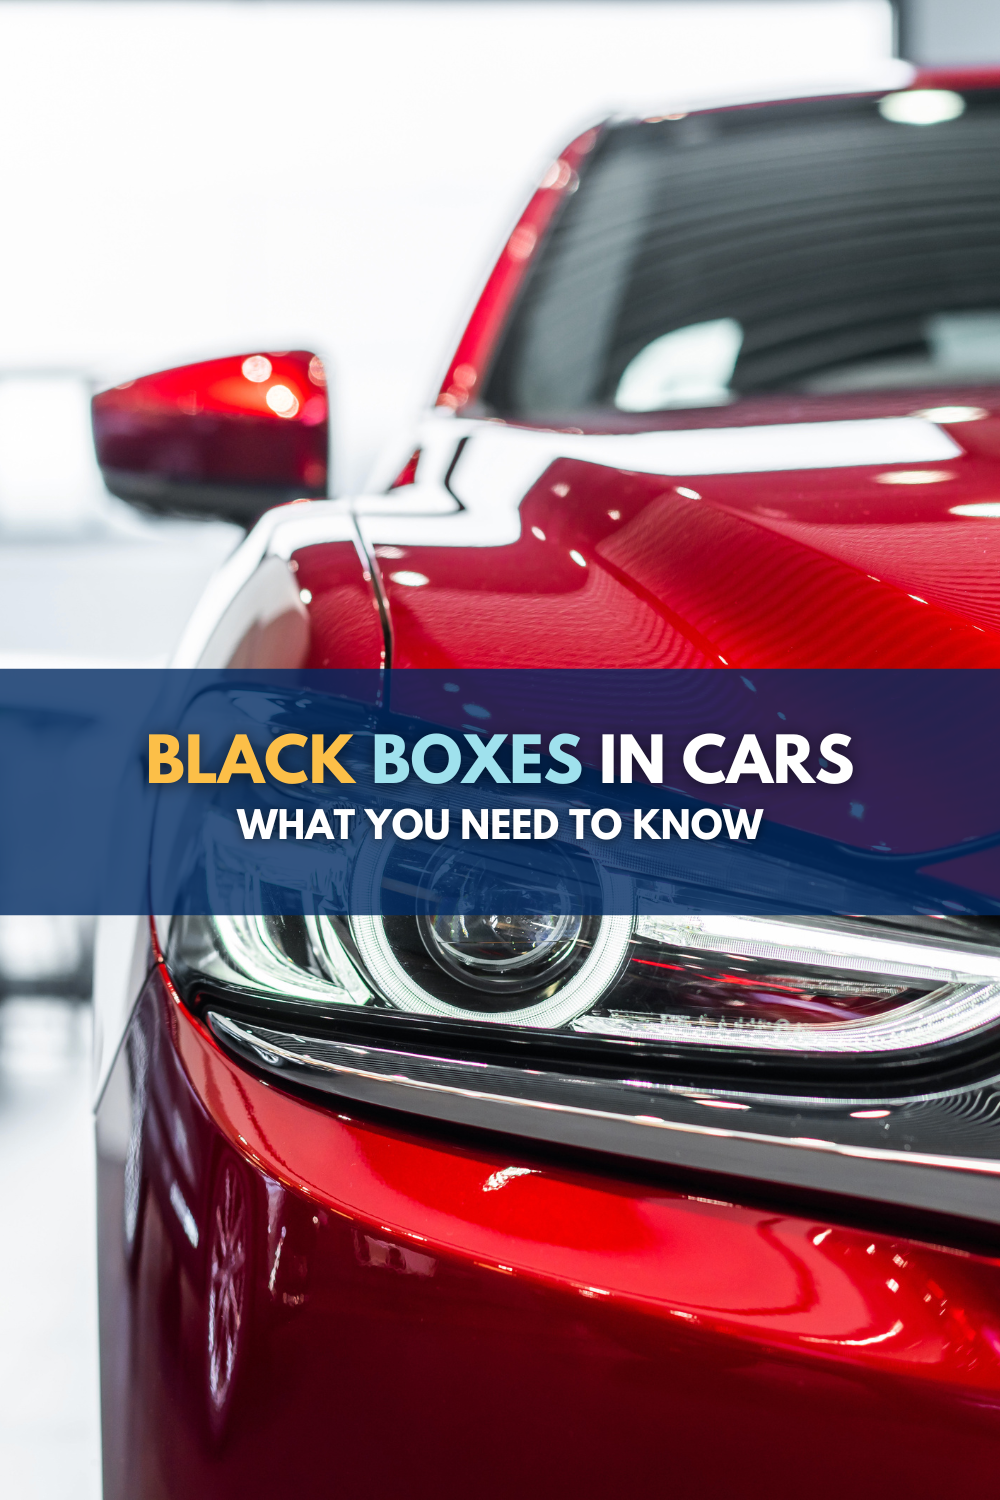 Black Boxes In Cars: What You Need To Know